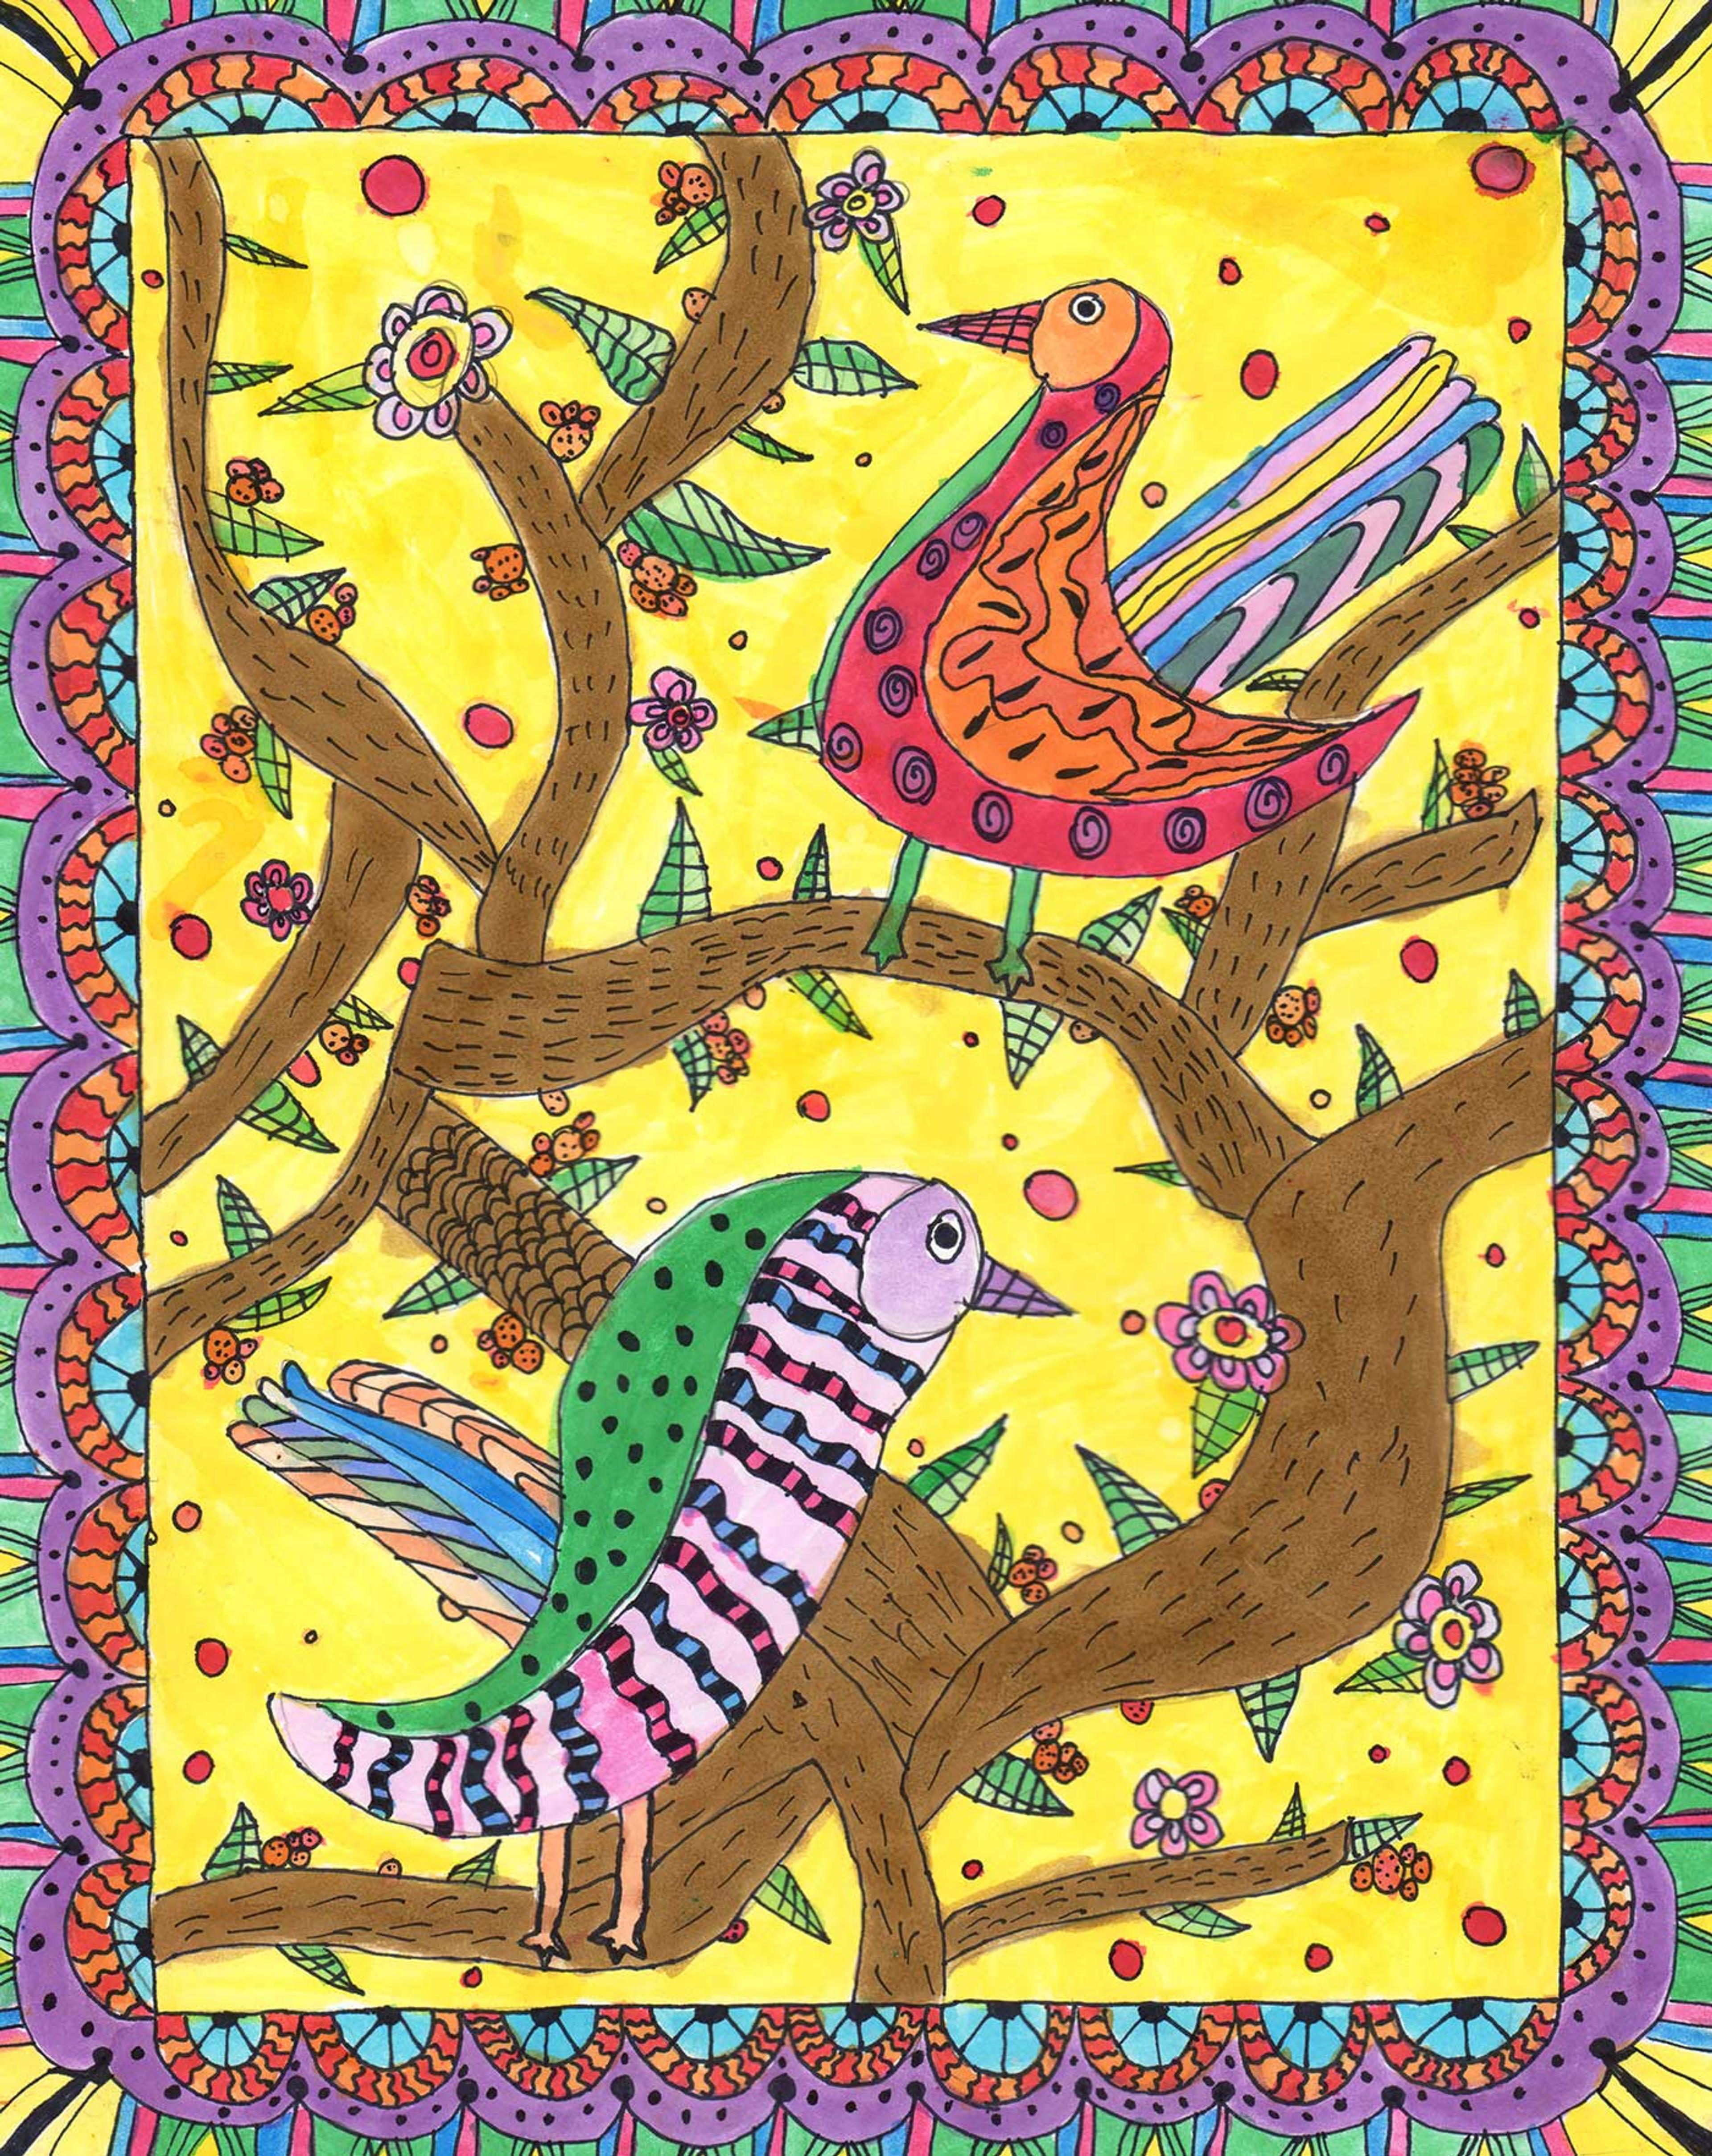 Watercolor painting of two birds in colorful patterns sitting on branches with a yellow background with a patterned border.